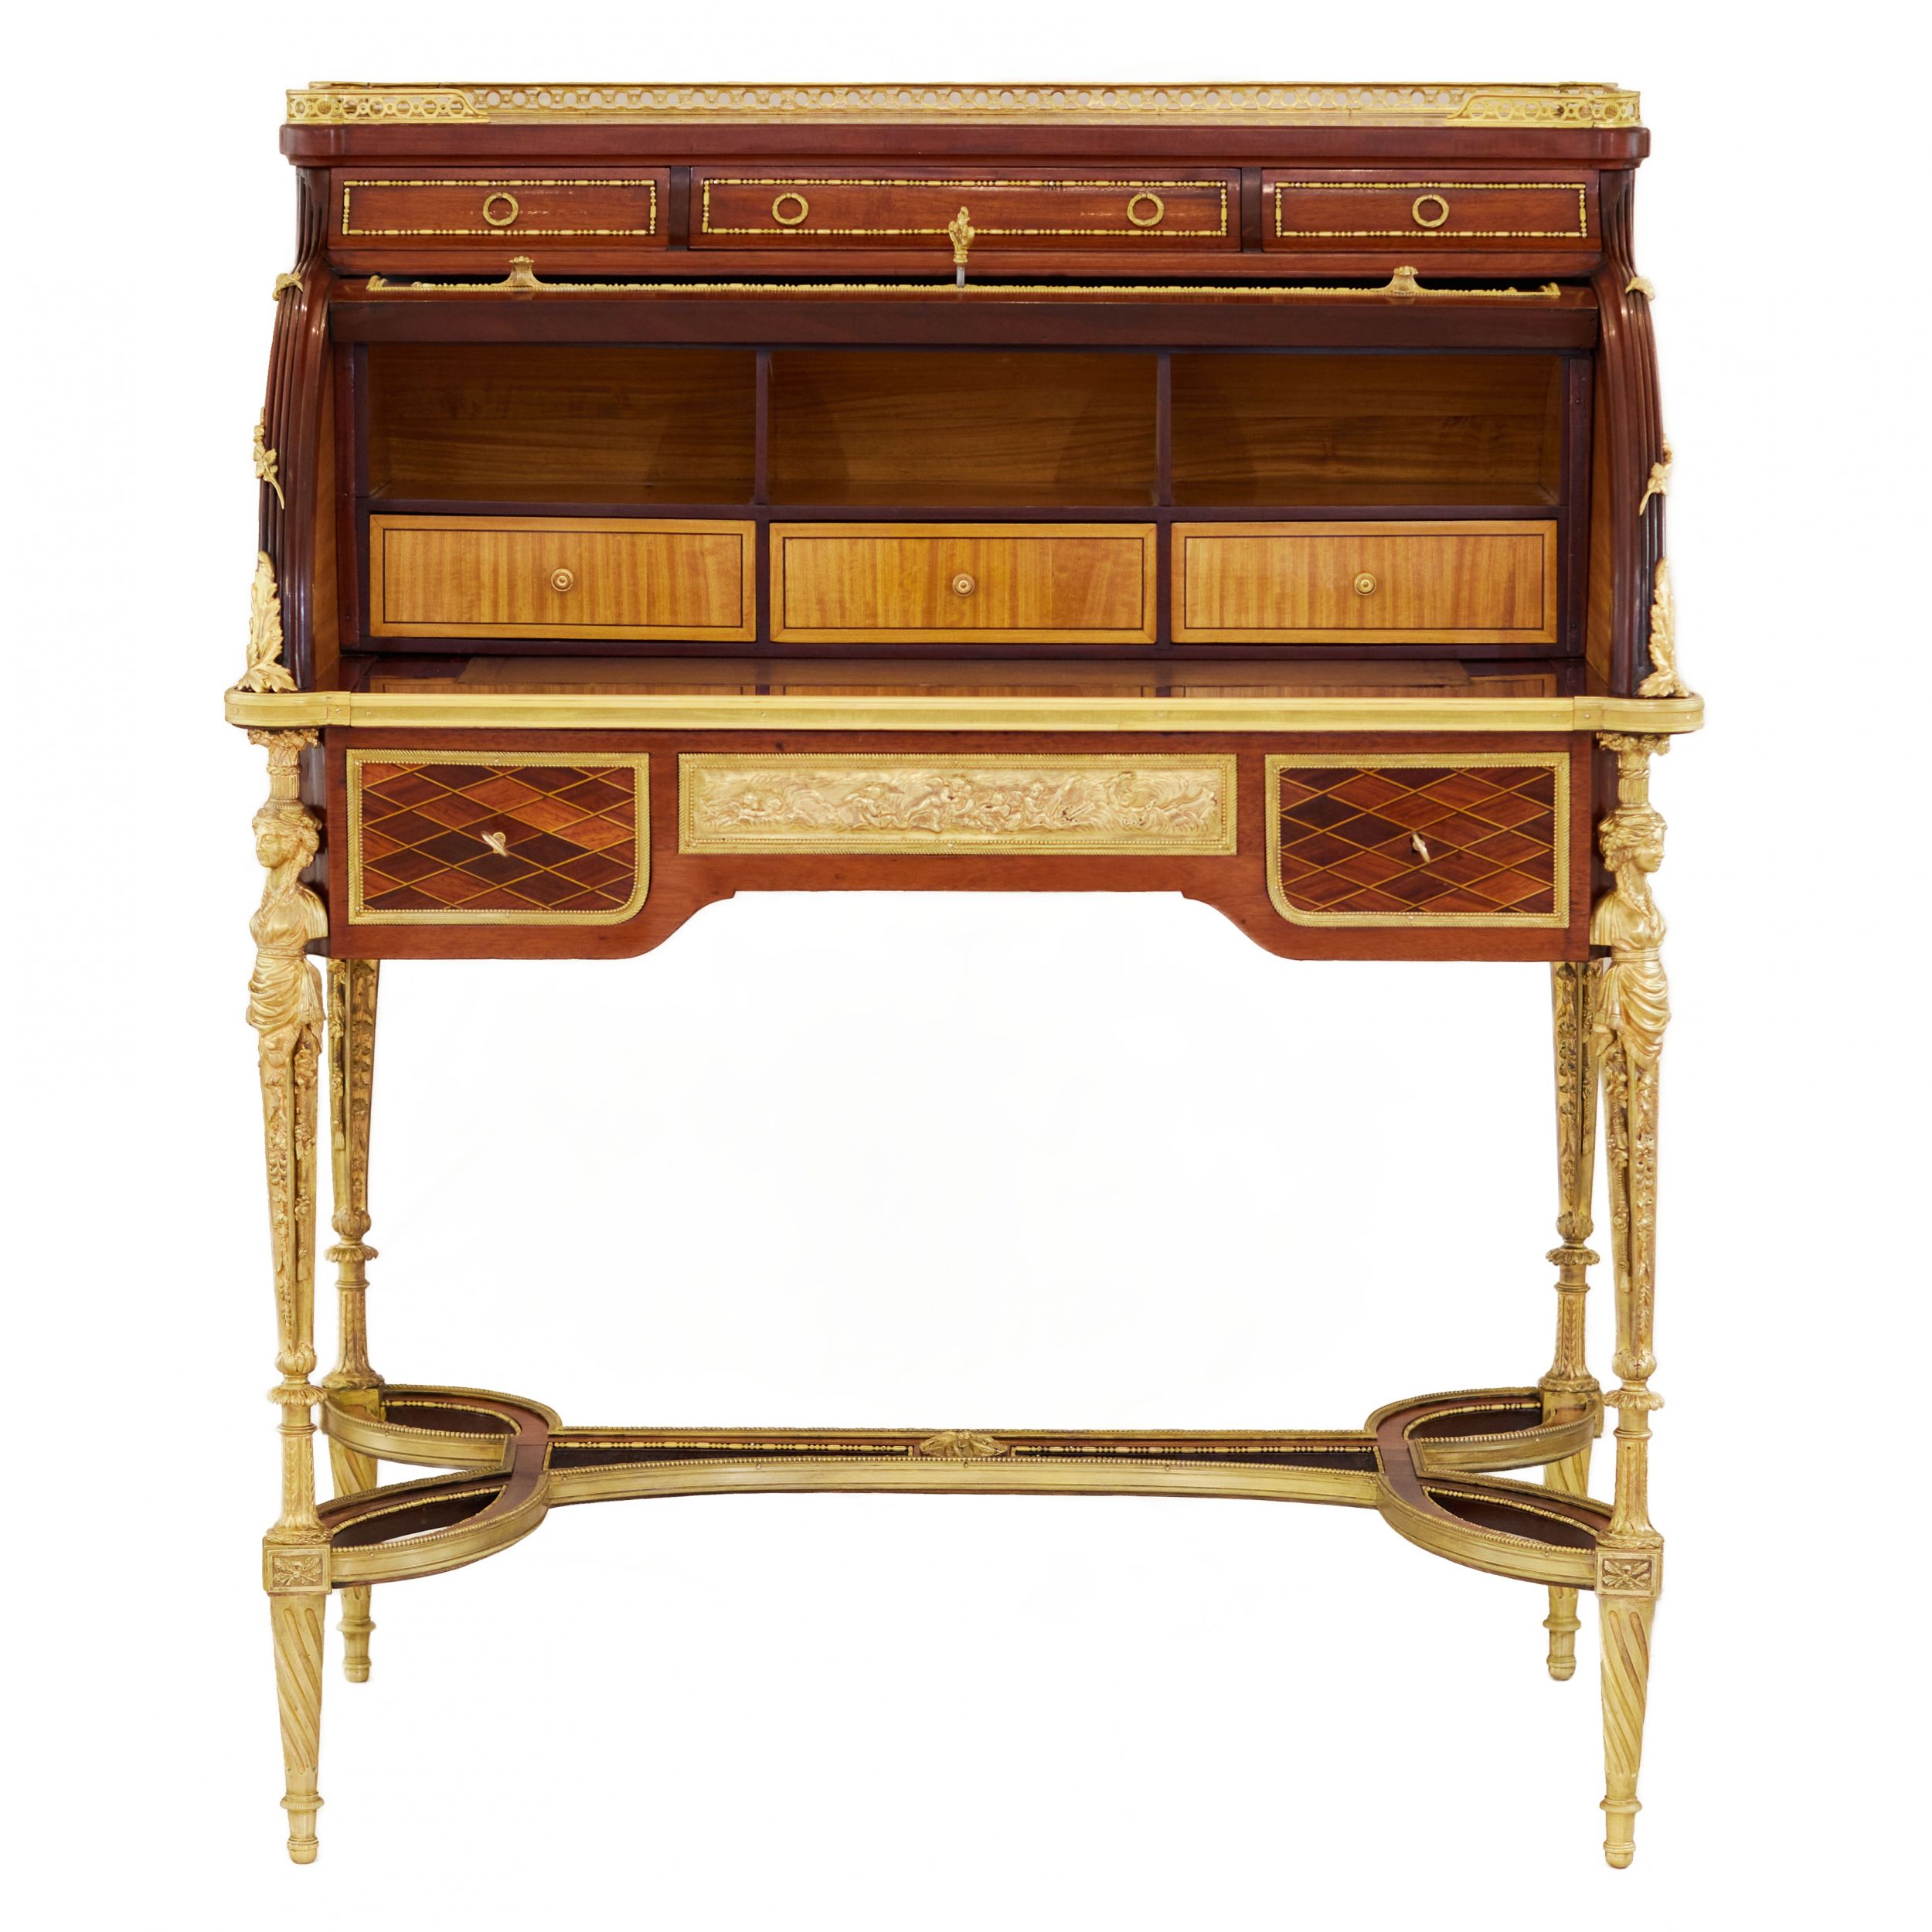 E.KAHN. A magnificent cylindrical bureau in mahogany and satin wood with gilt bronze. - Image 4 of 14